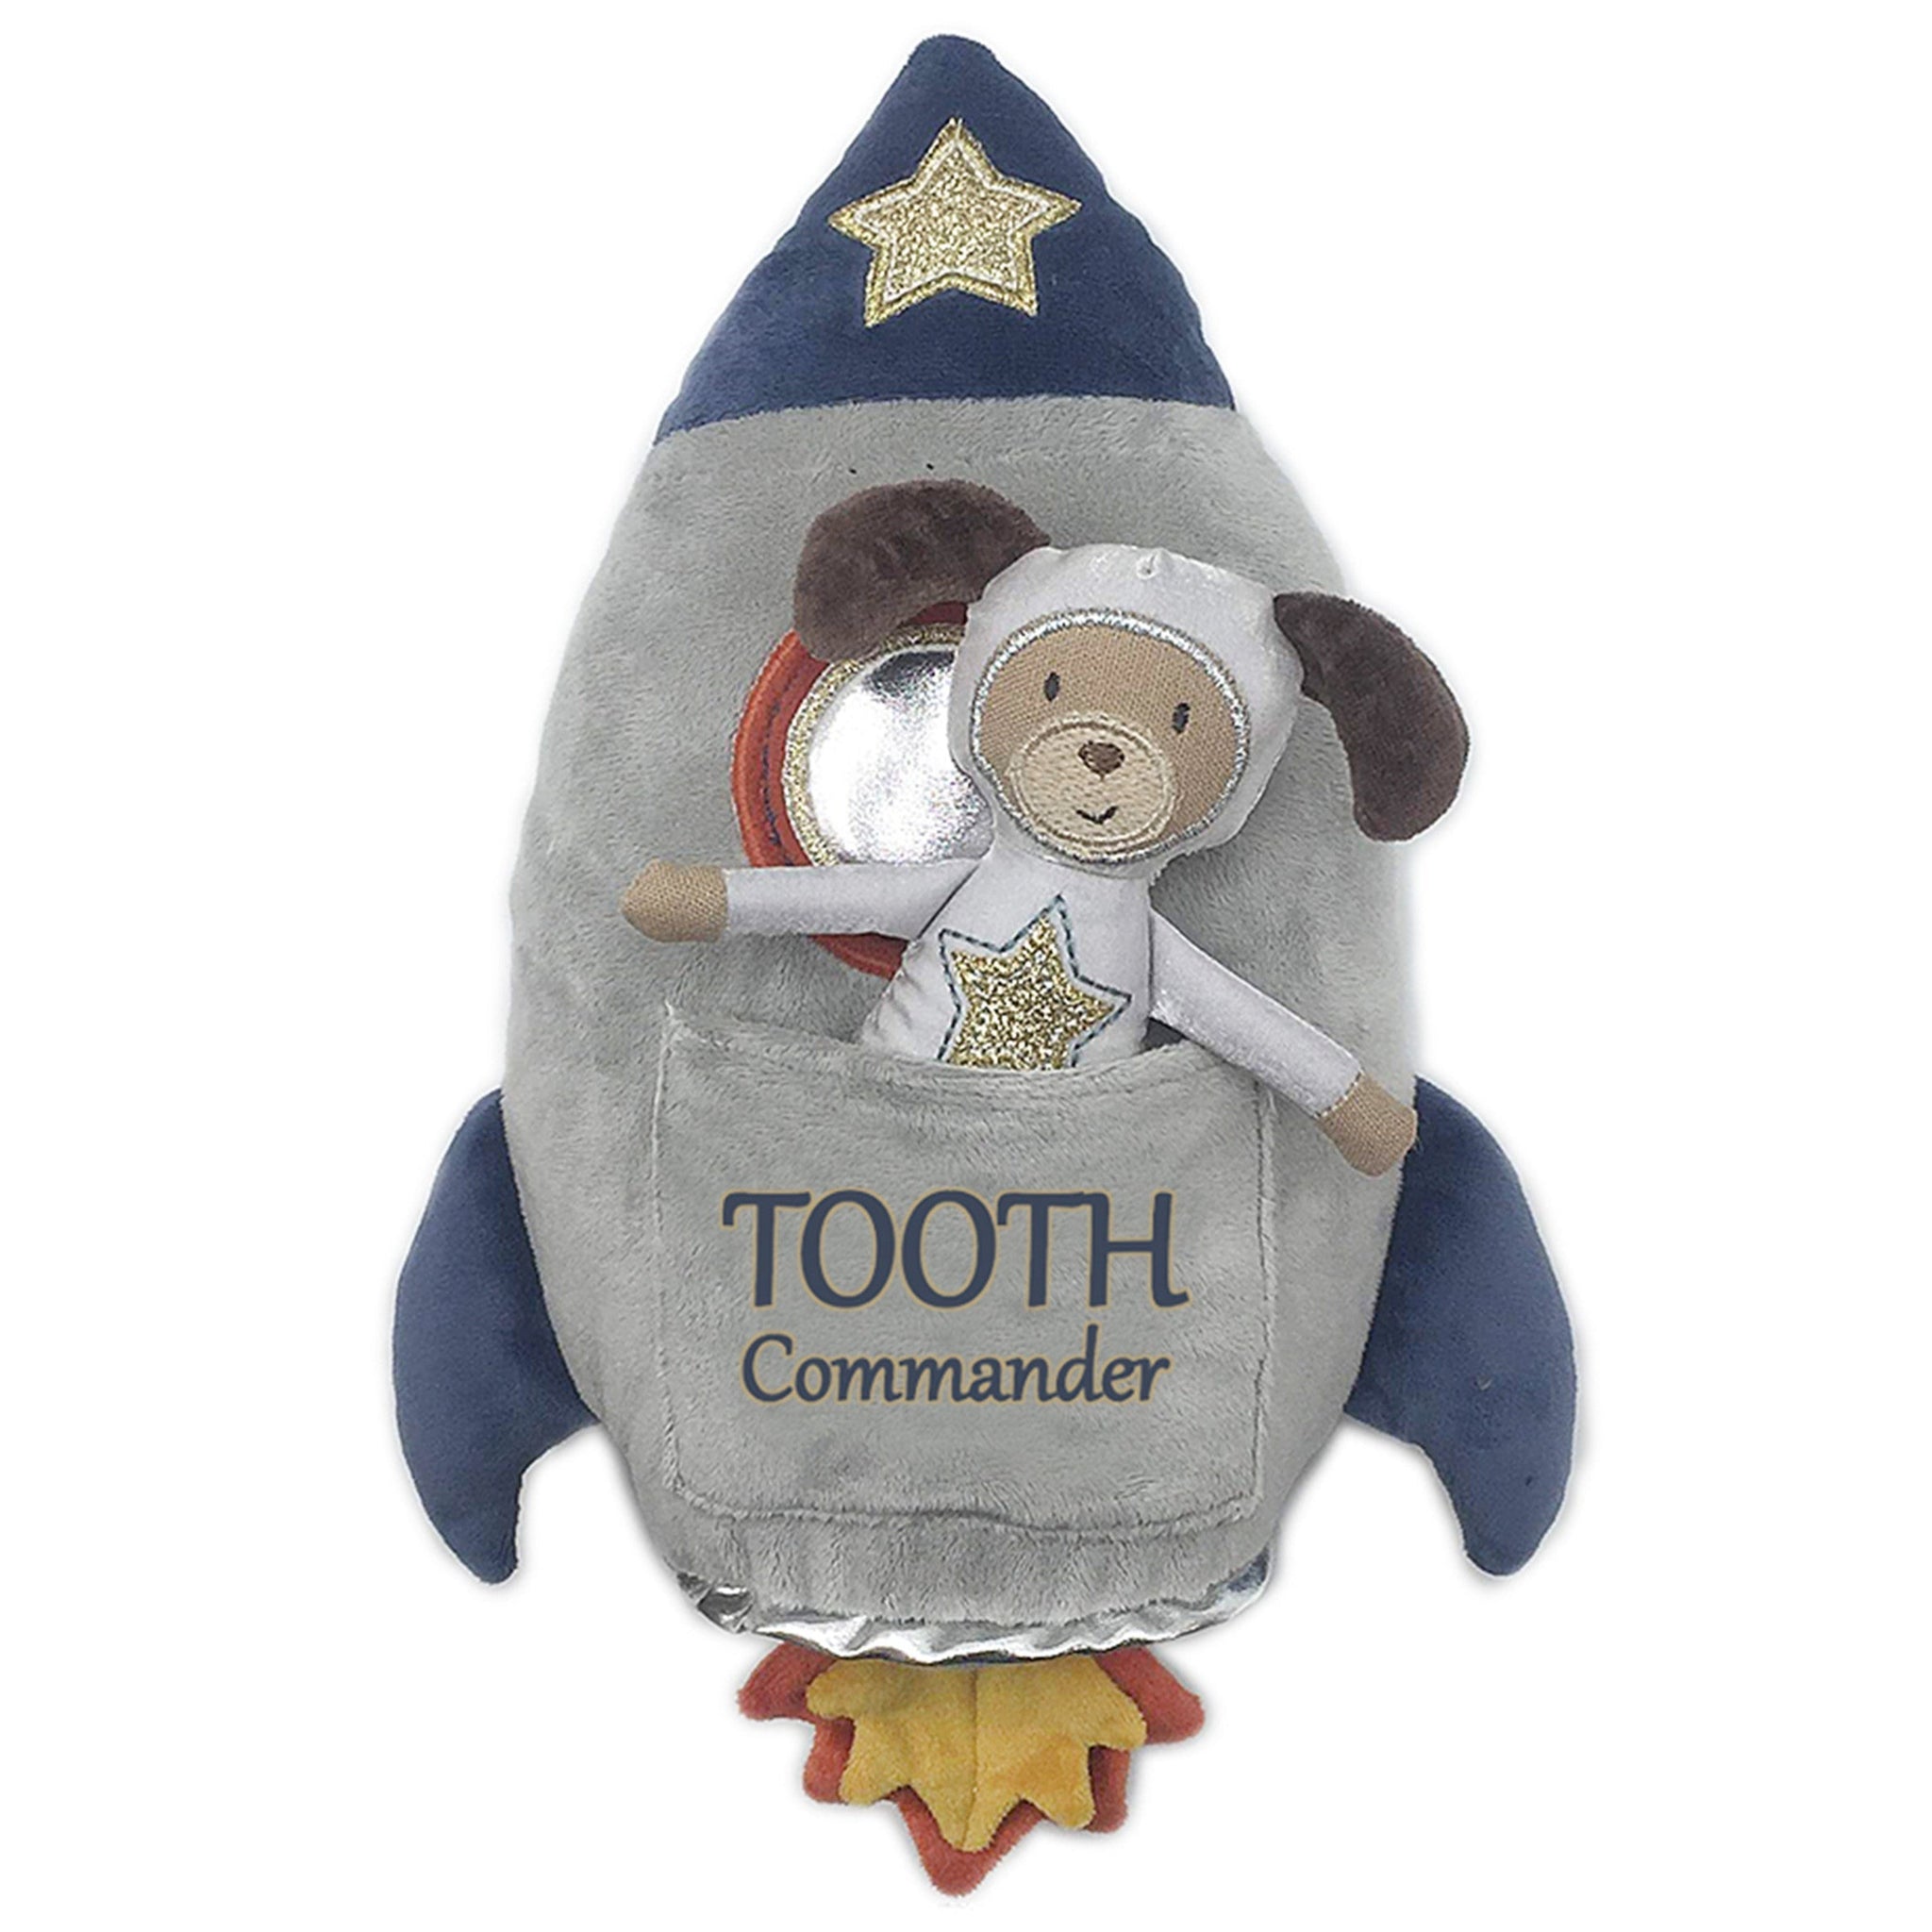 Spaceship 'Tooth Commander' Pillow And Doll Set - HoneyBug 